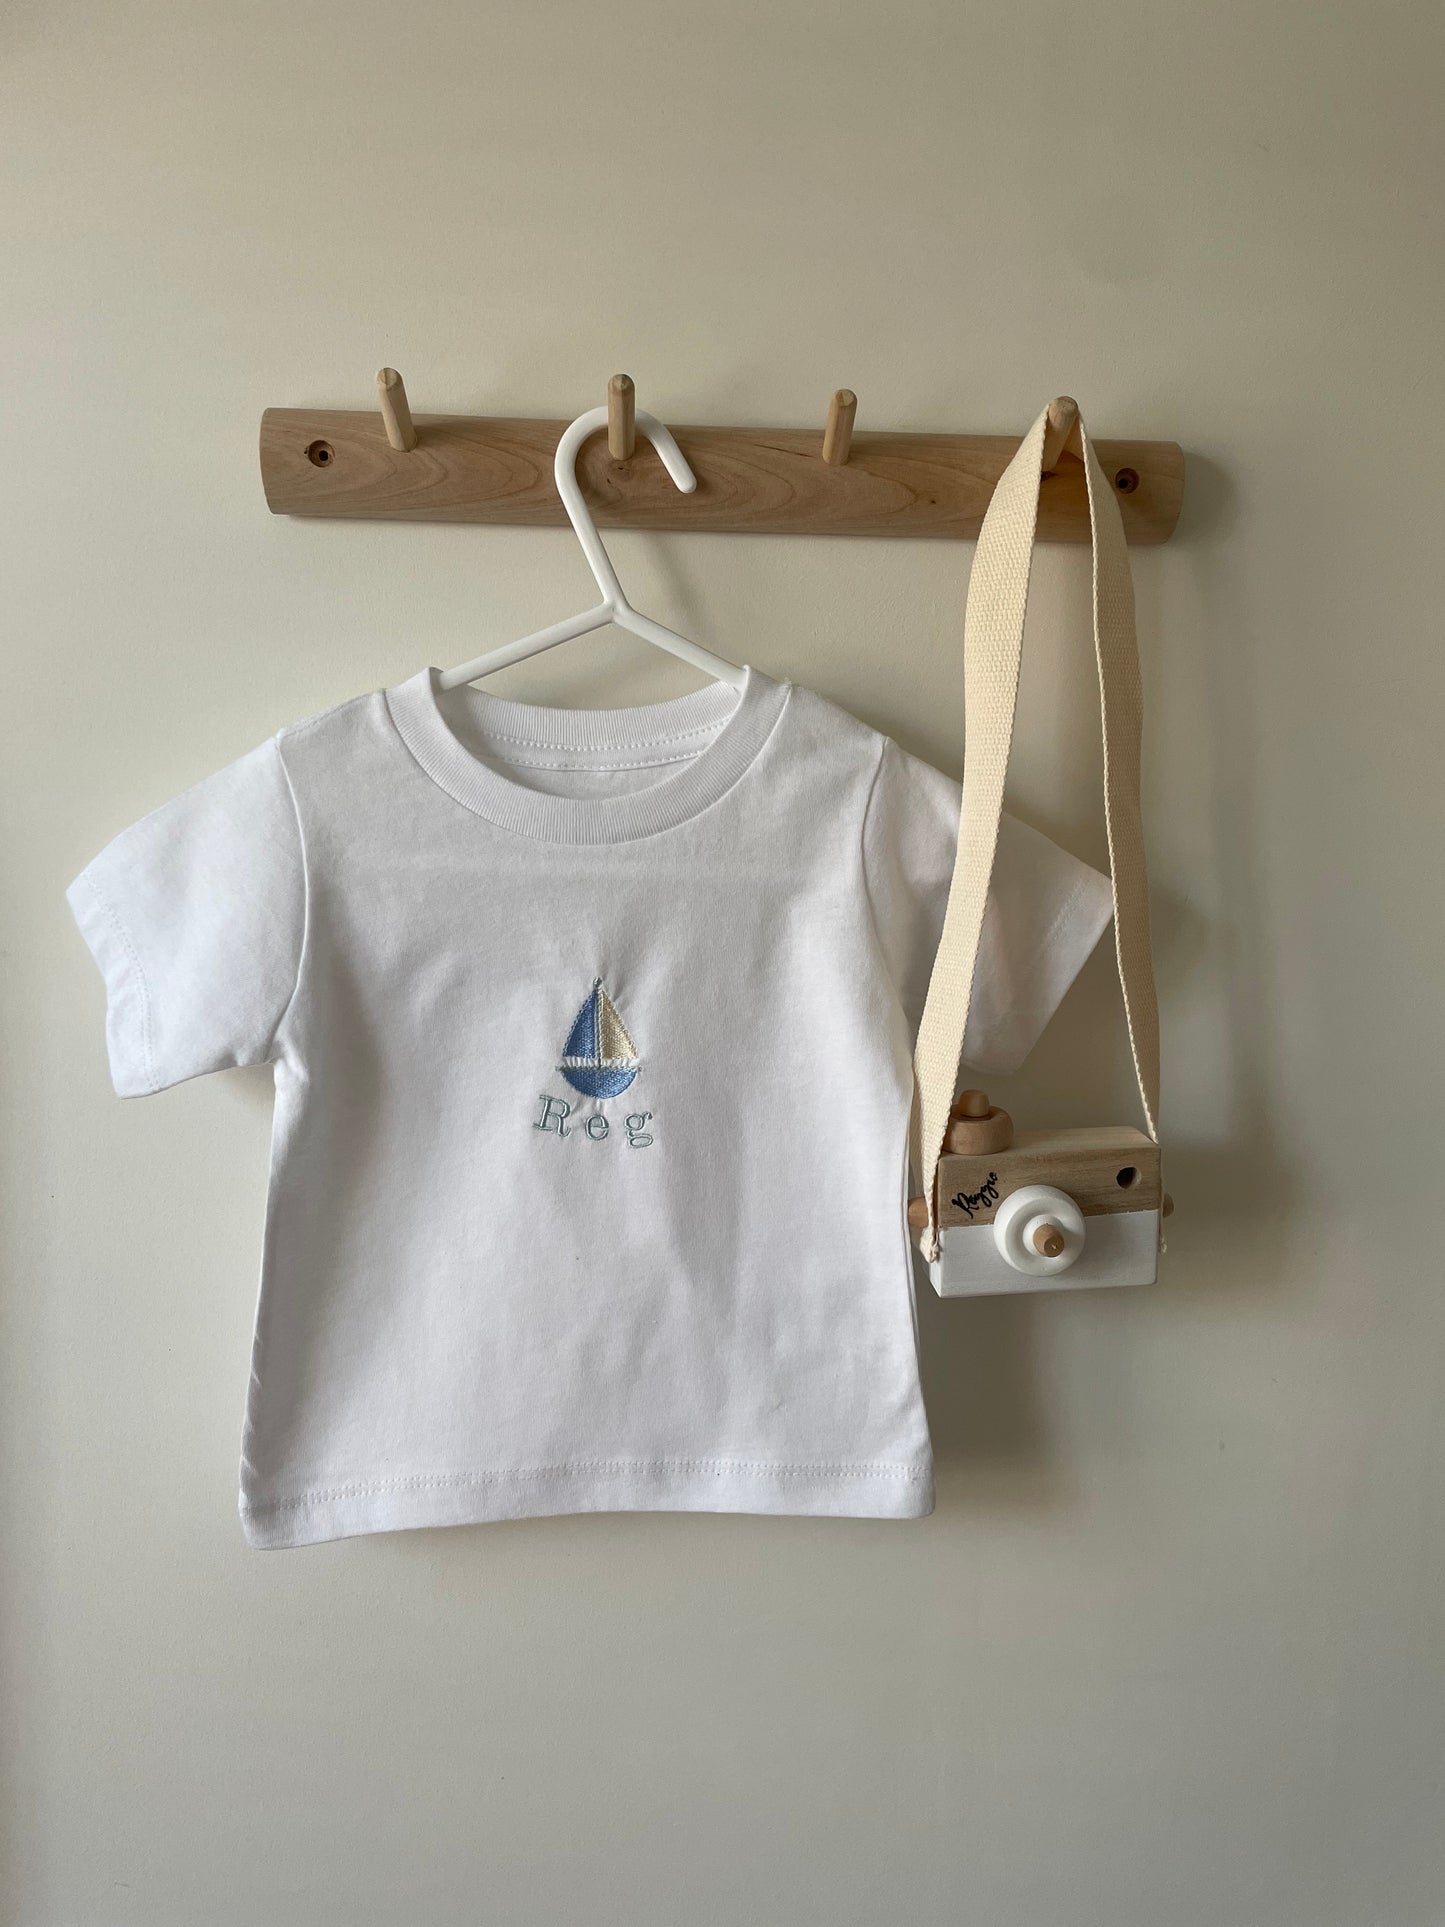 Personalised boat t-shirt